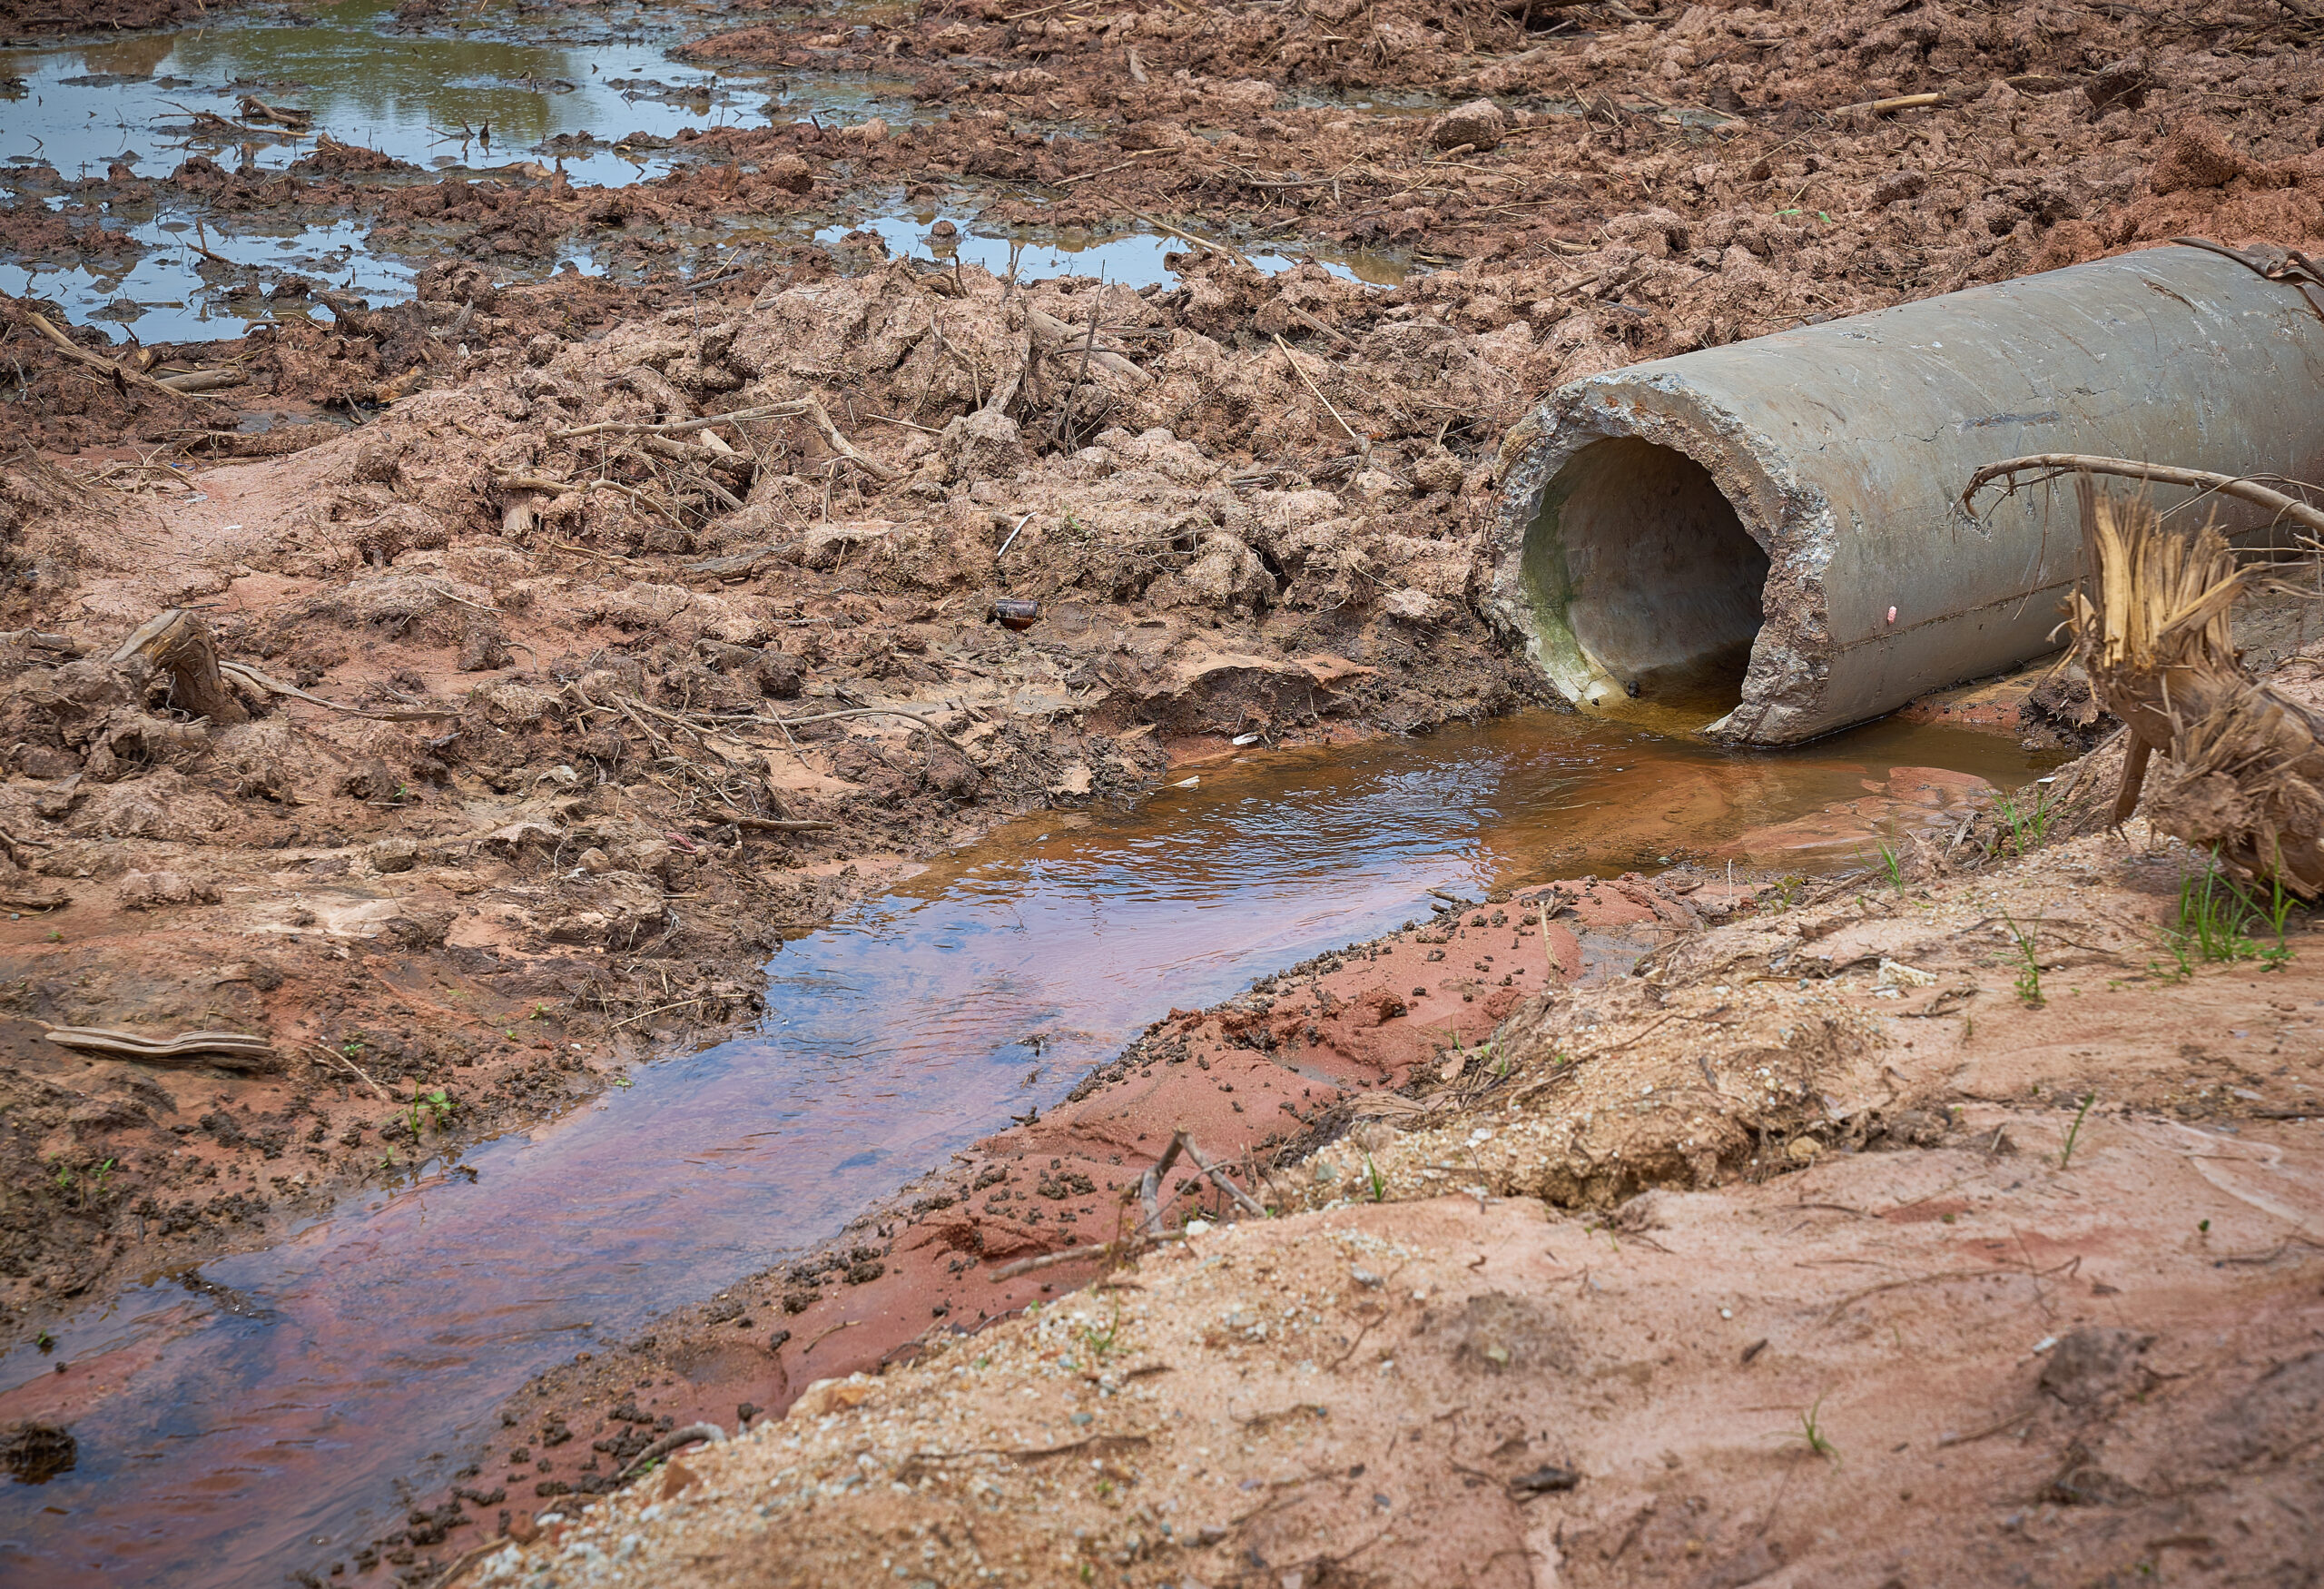 Waste water flowing onto the land from broken cement draining pipeline causing contamination.